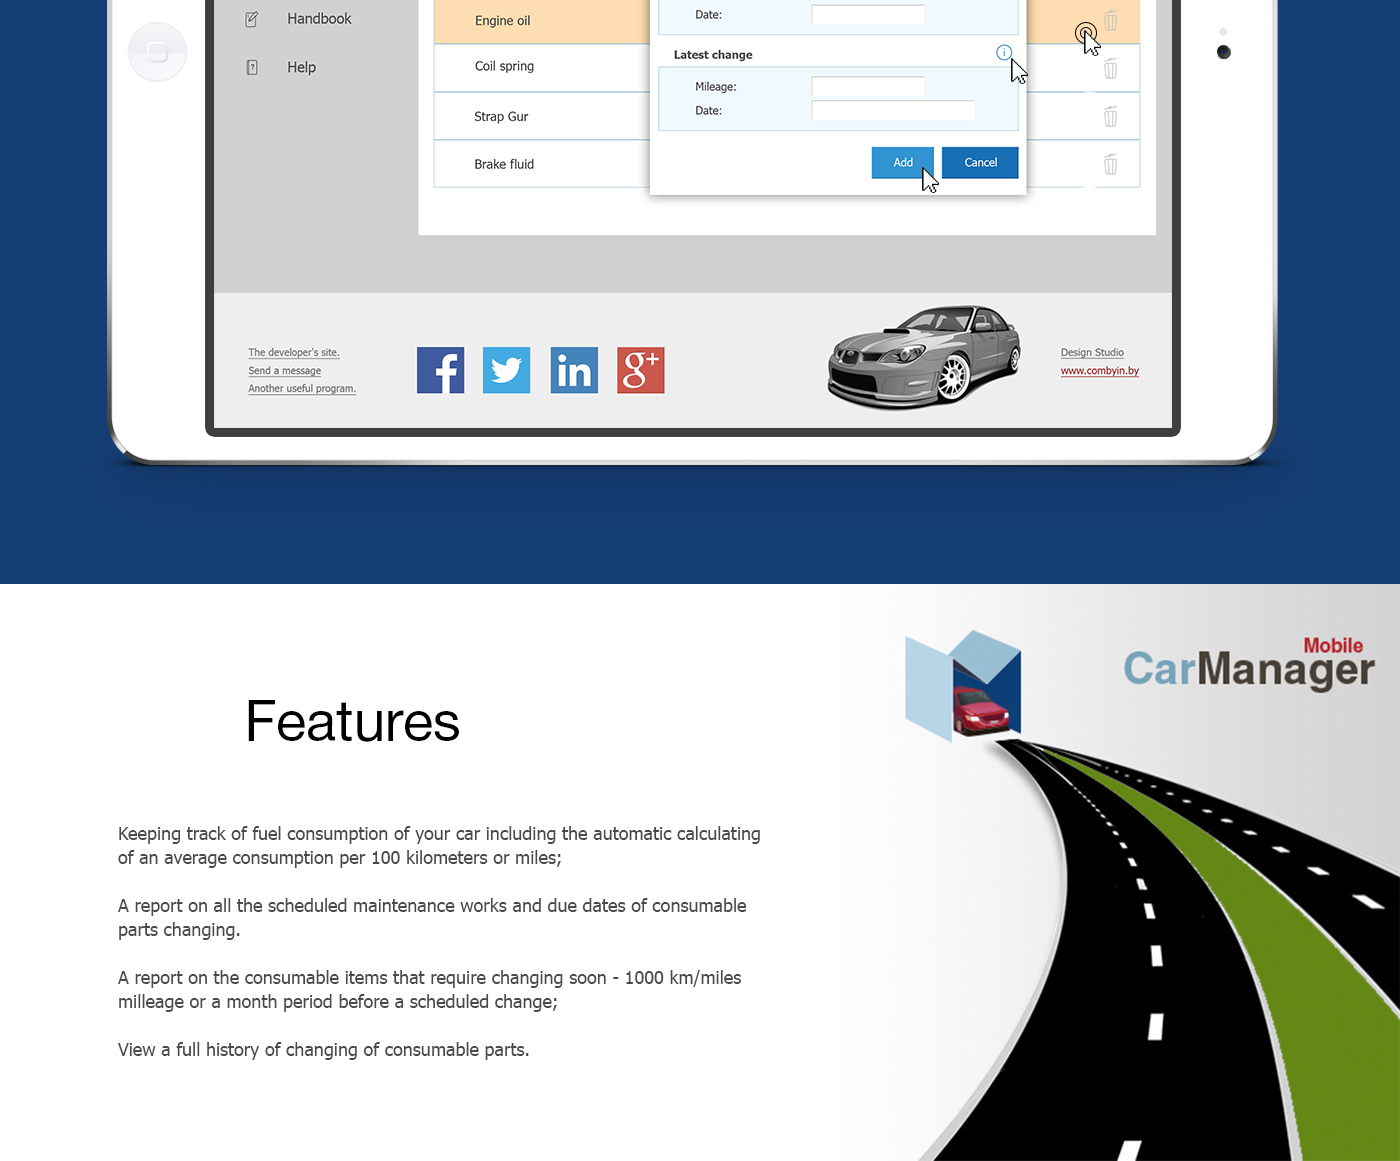 Web car manager design Website app logo icons Style Usability Interface